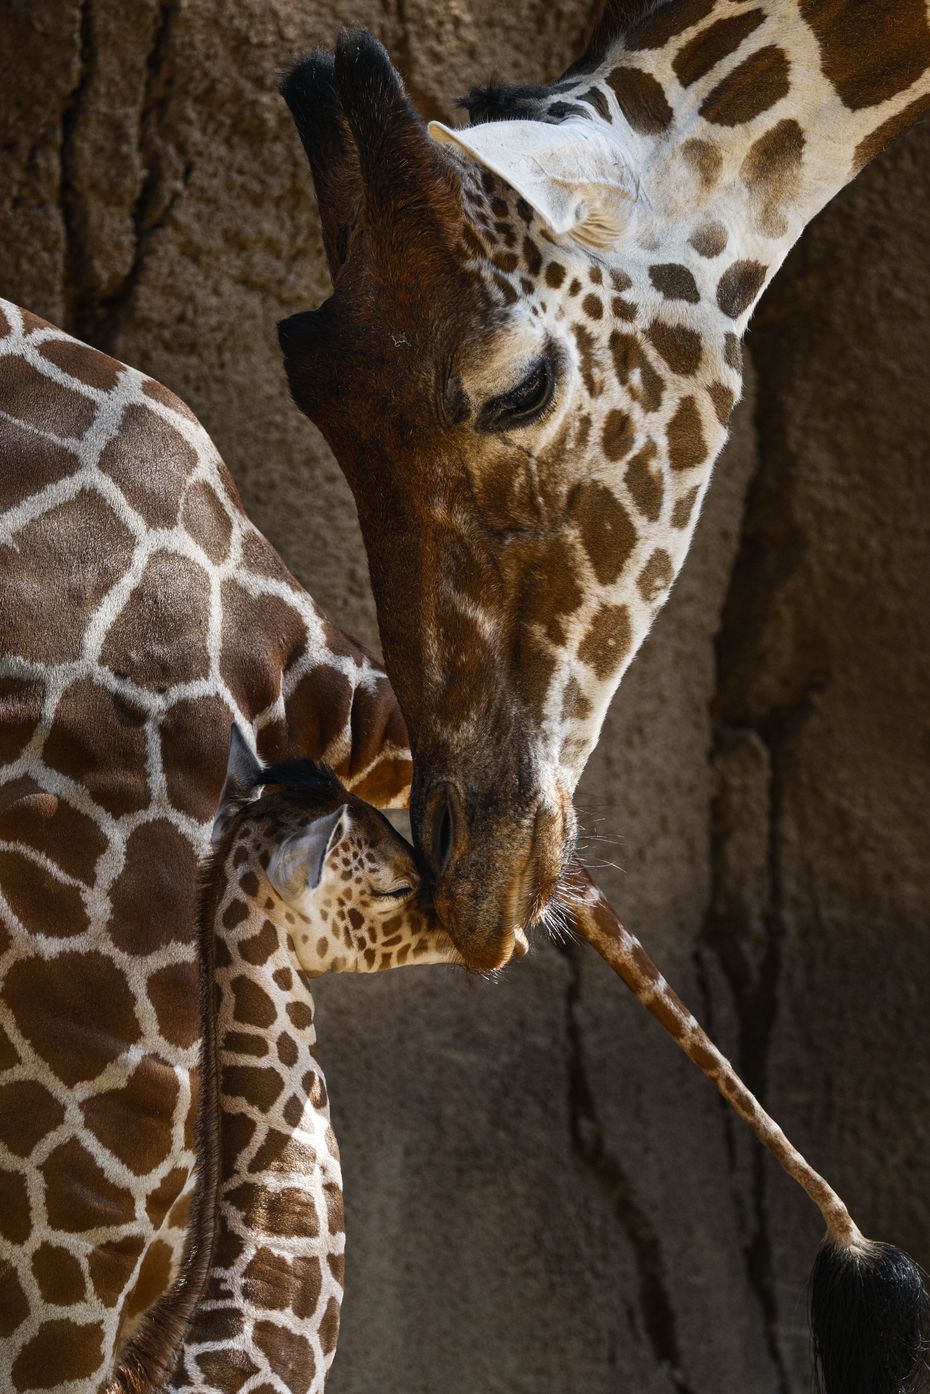 Marekani was greeted by Jesse as the calf made her public debut in July. Both giraffes have since died.